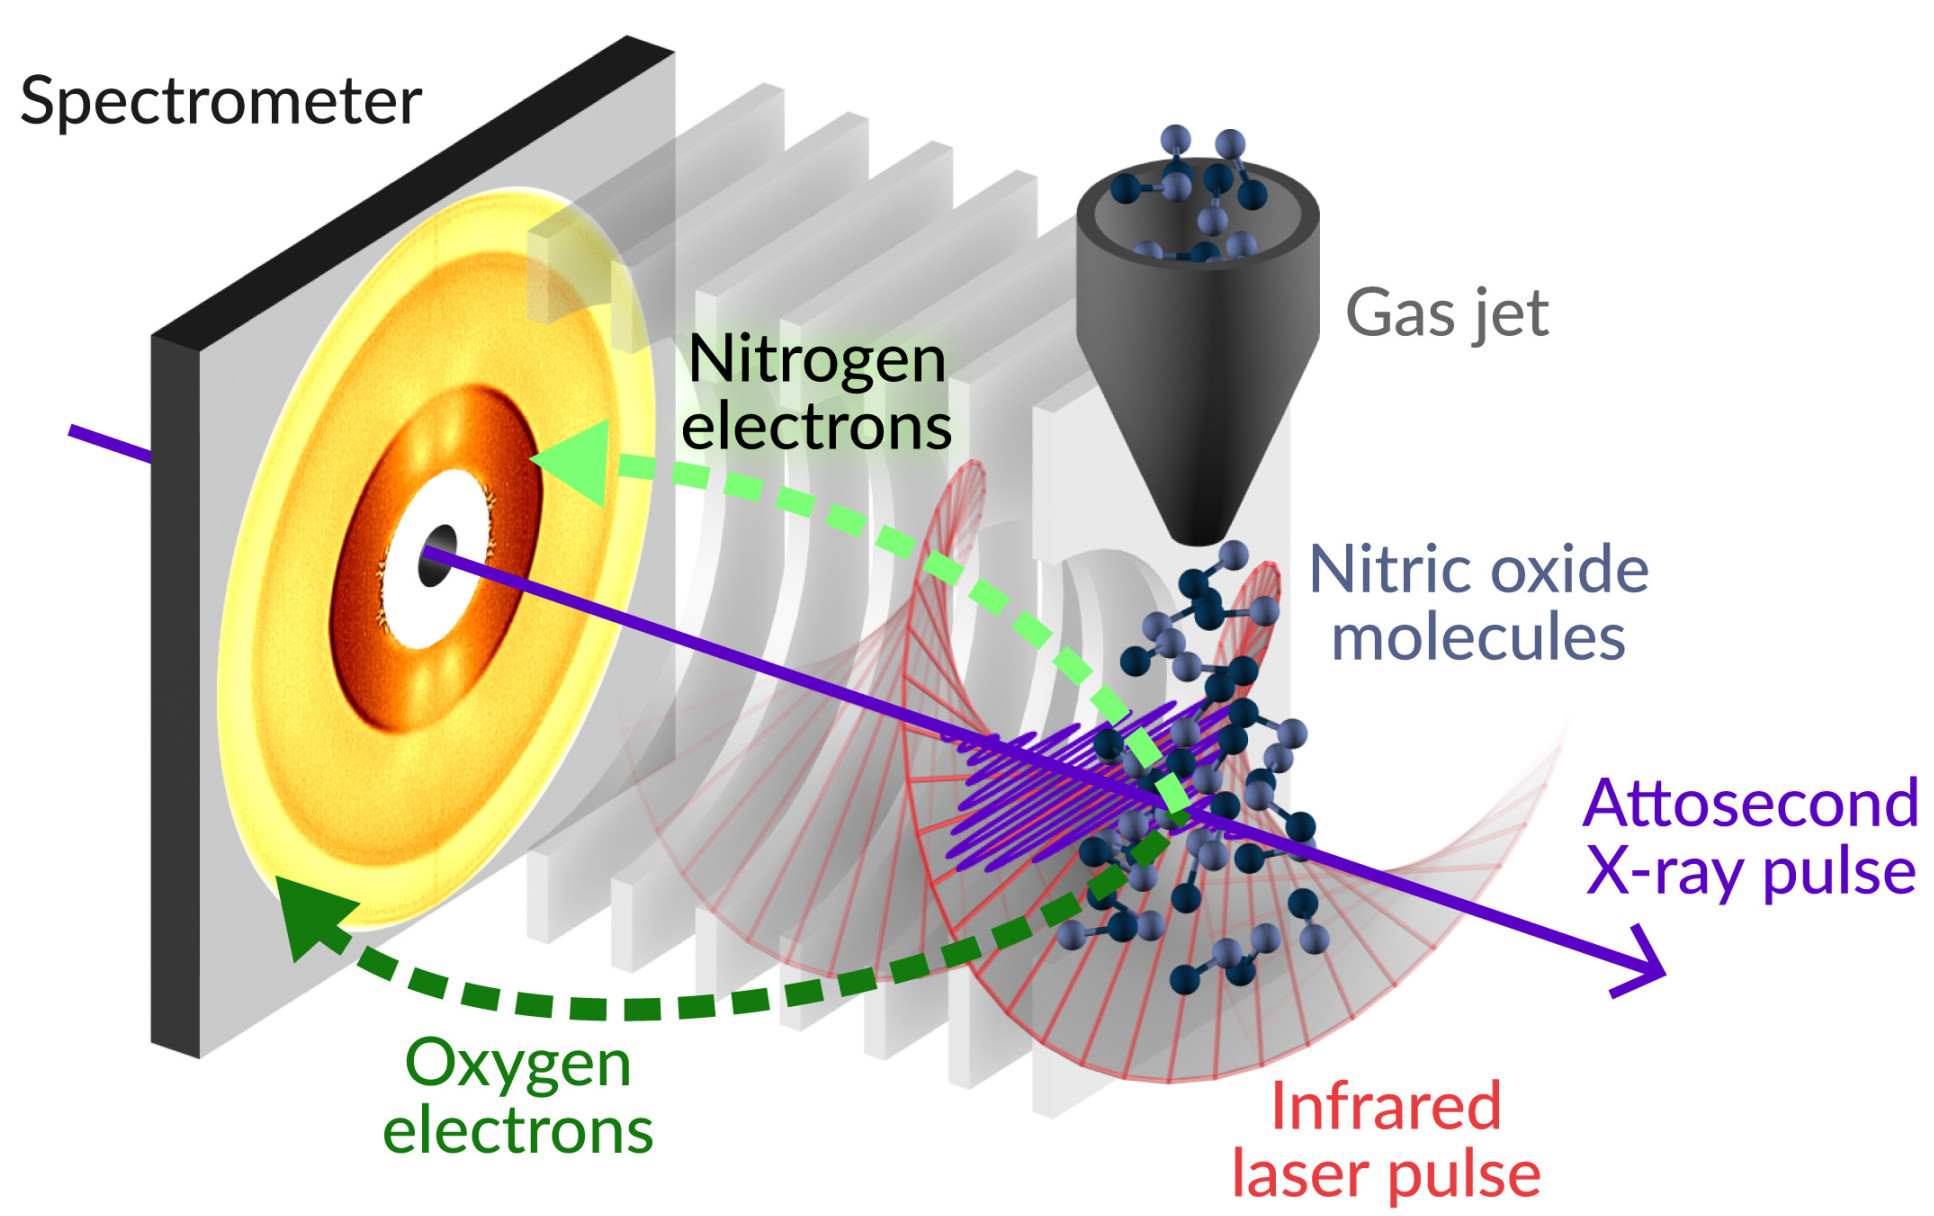 Schematic of the experimental setup, showing an attosecondx-ray pulse and an infrared laser pulse fired at a jet of gas made up of nitric oxide molecules, with nitrogen and oxygen electrons being emitted and detected by a spectrometer